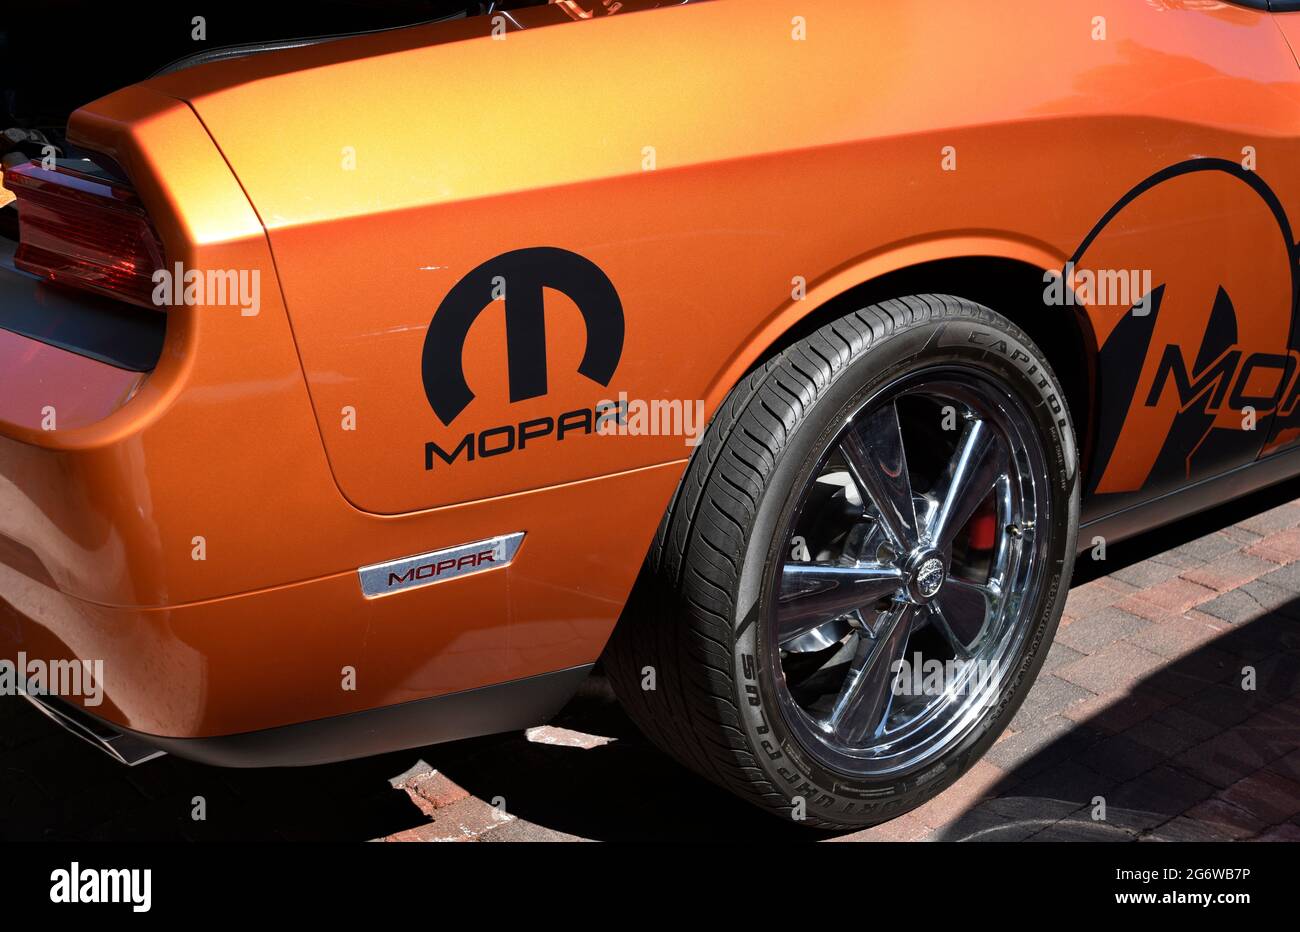 A Mopar (Chrysler Motor Parts Corp.) branded classic car on display at a car show in Santa Fe, New Mexico. Stock Photo